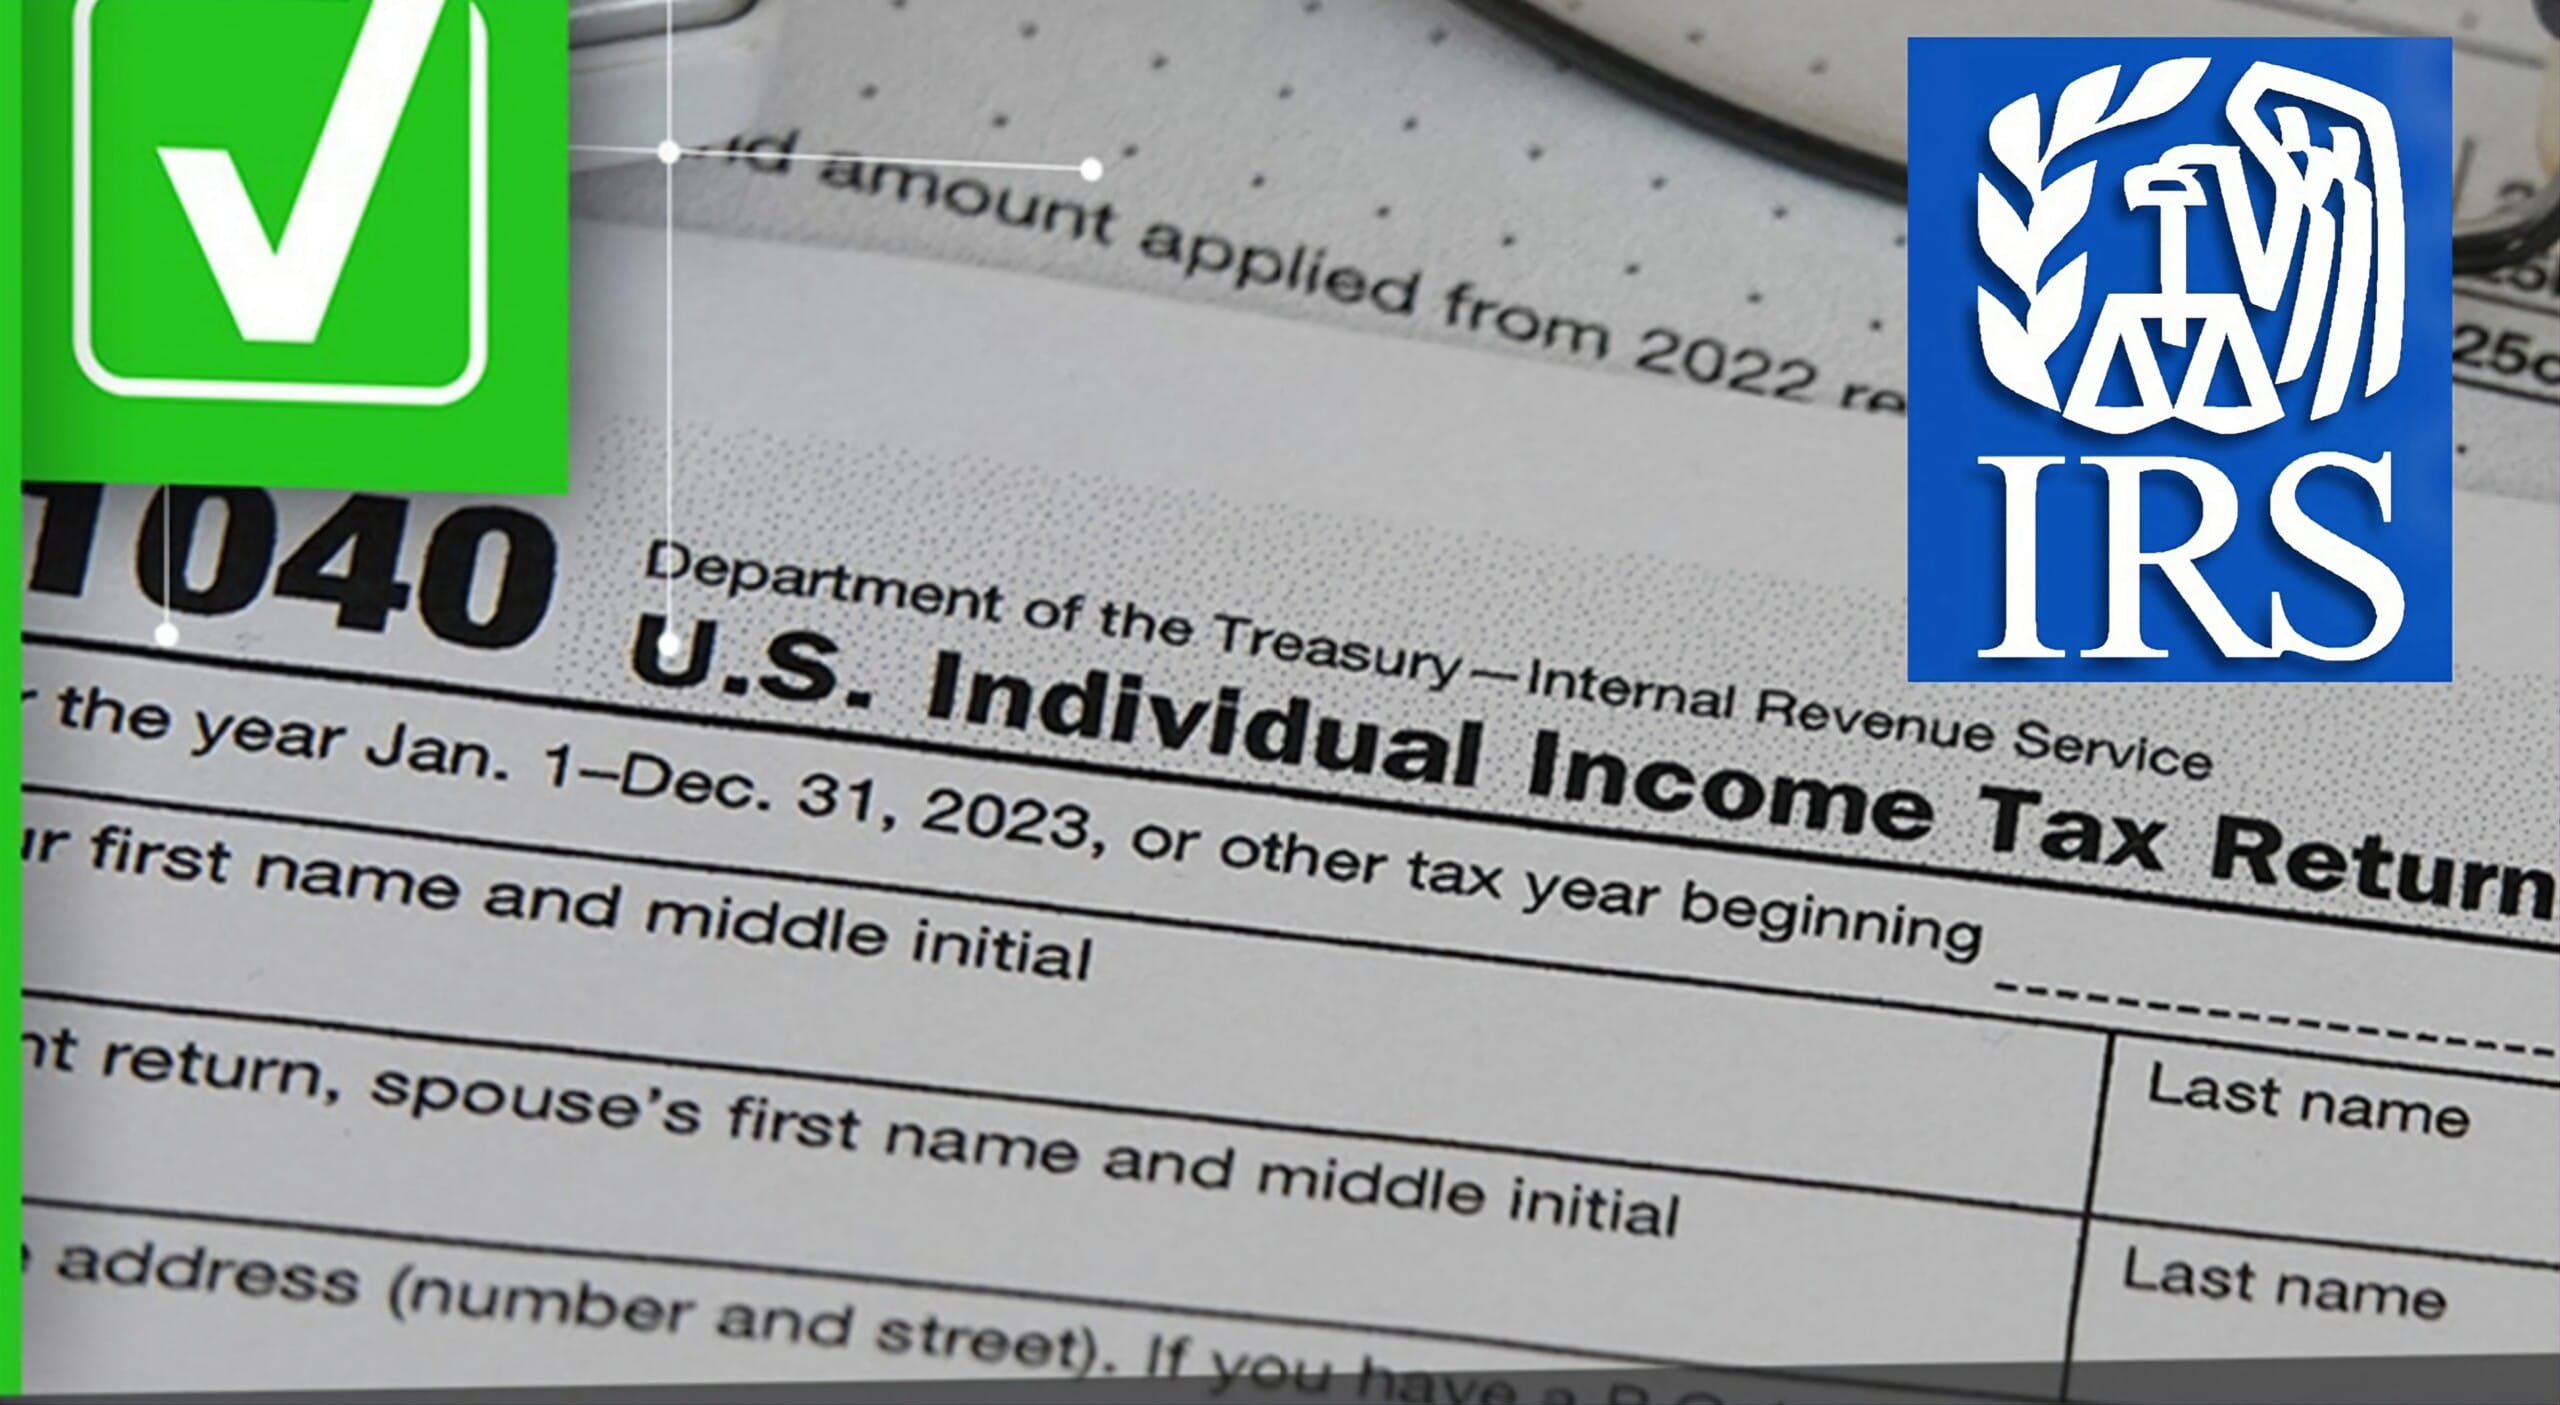 What is the deadline to file your tax return without penalty?